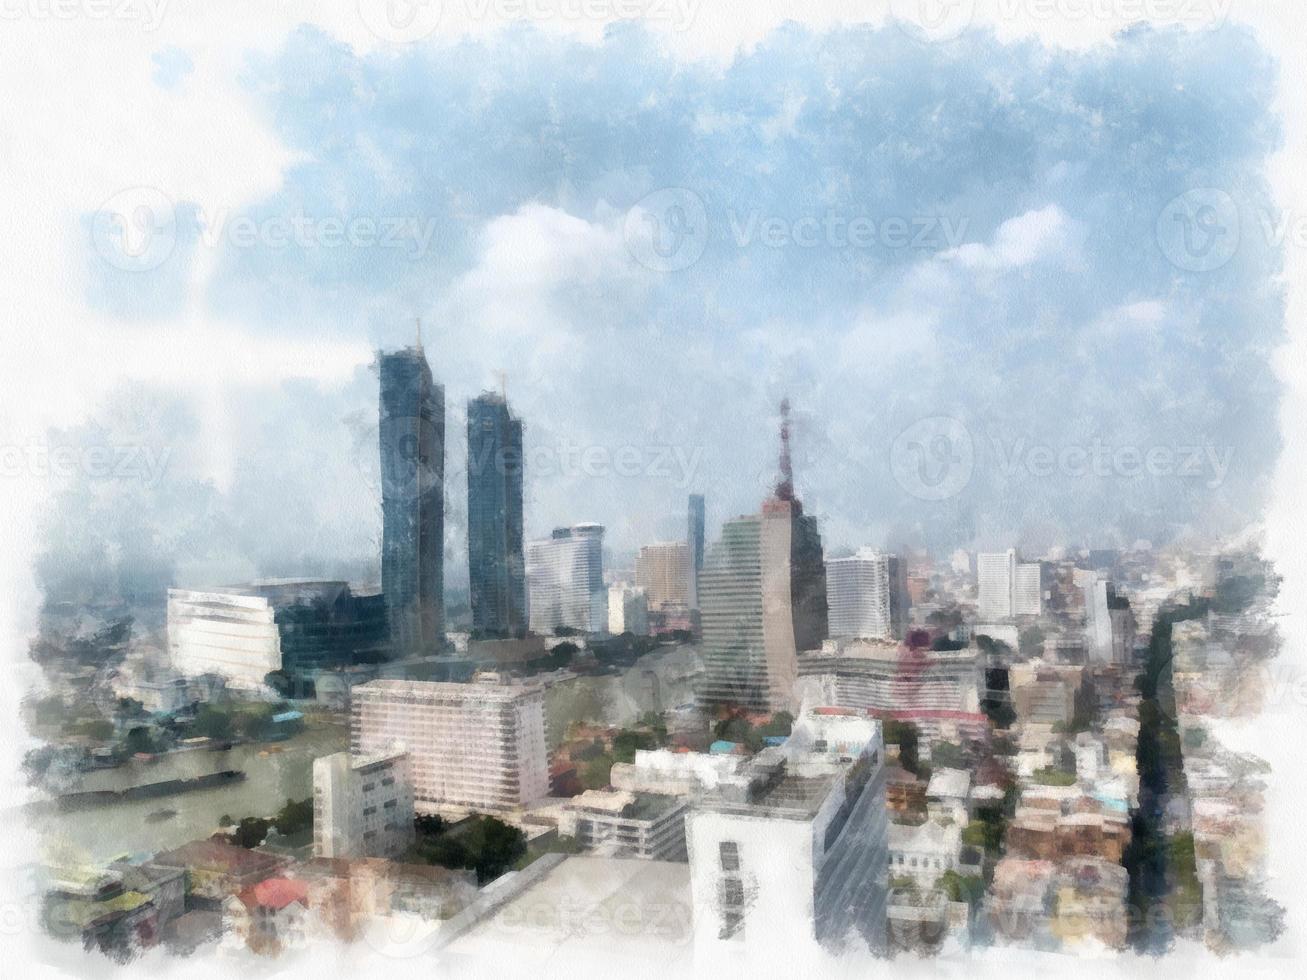 Landscape of tall buildings and streets in Bangkok watercolor style illustration impressionist painting. photo